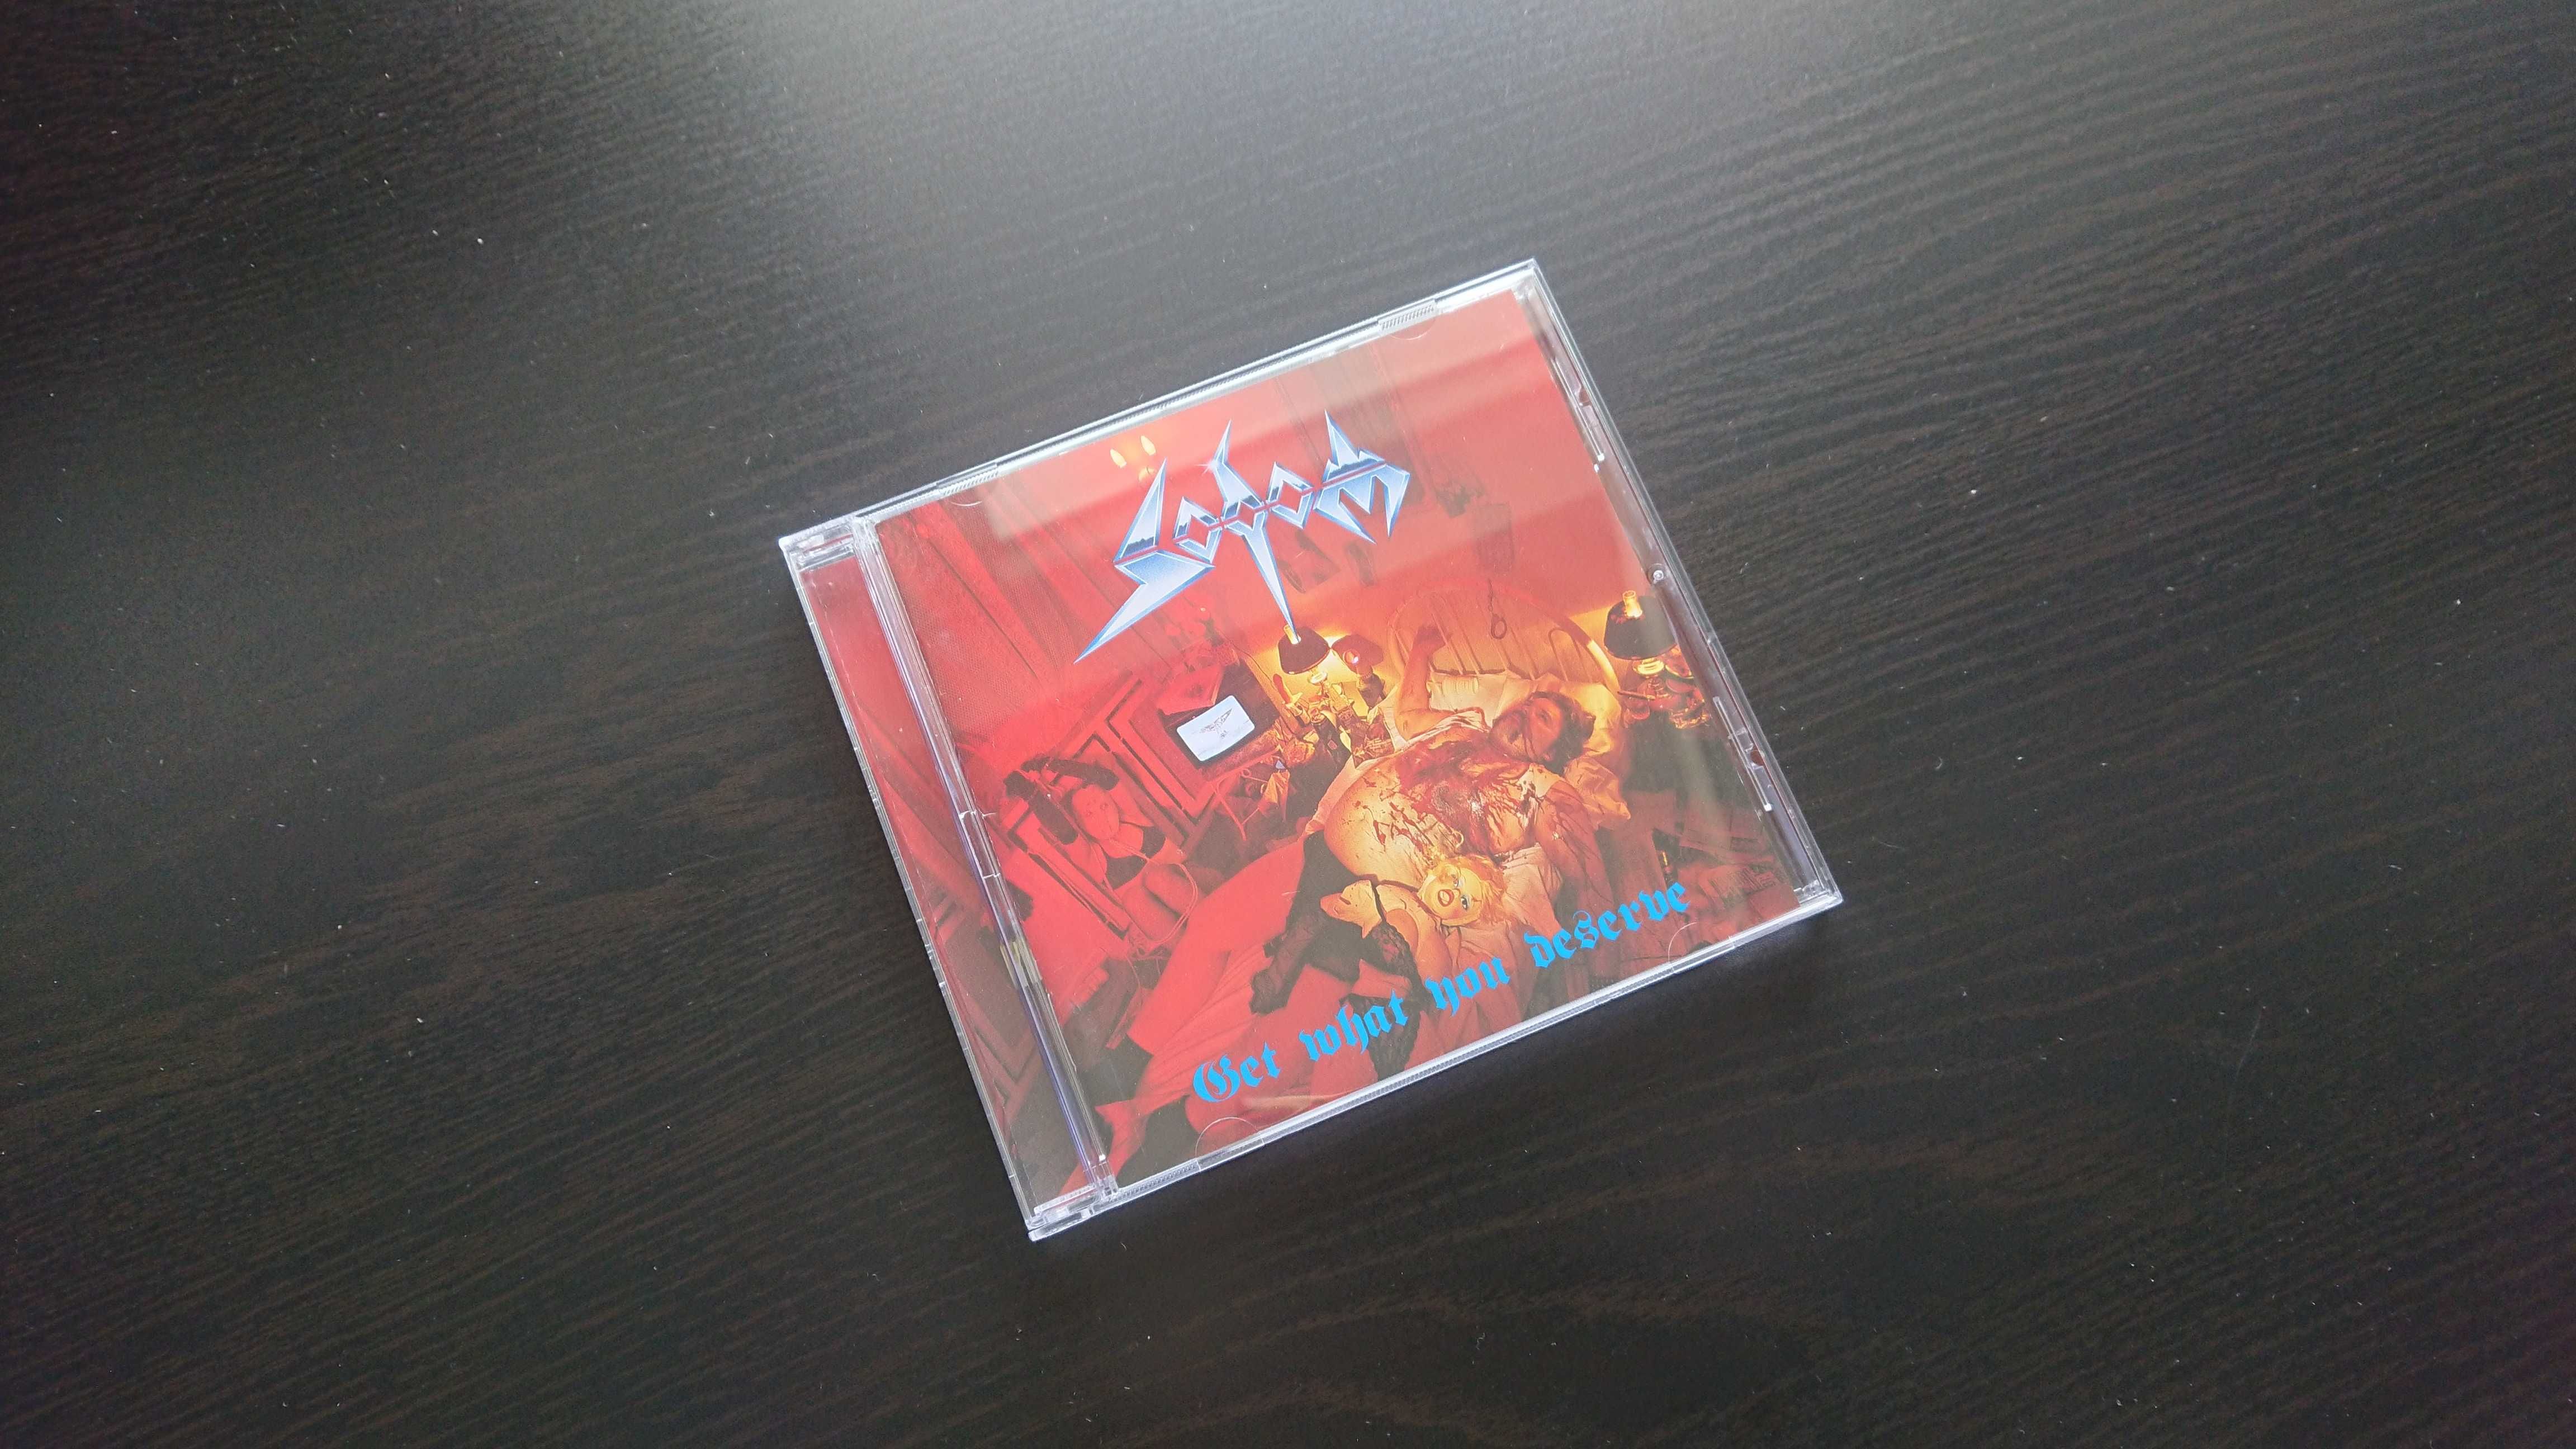 Sodom Get What You Deserve CD *IDEALNY STAN* SPV One-Sided Inlay Card